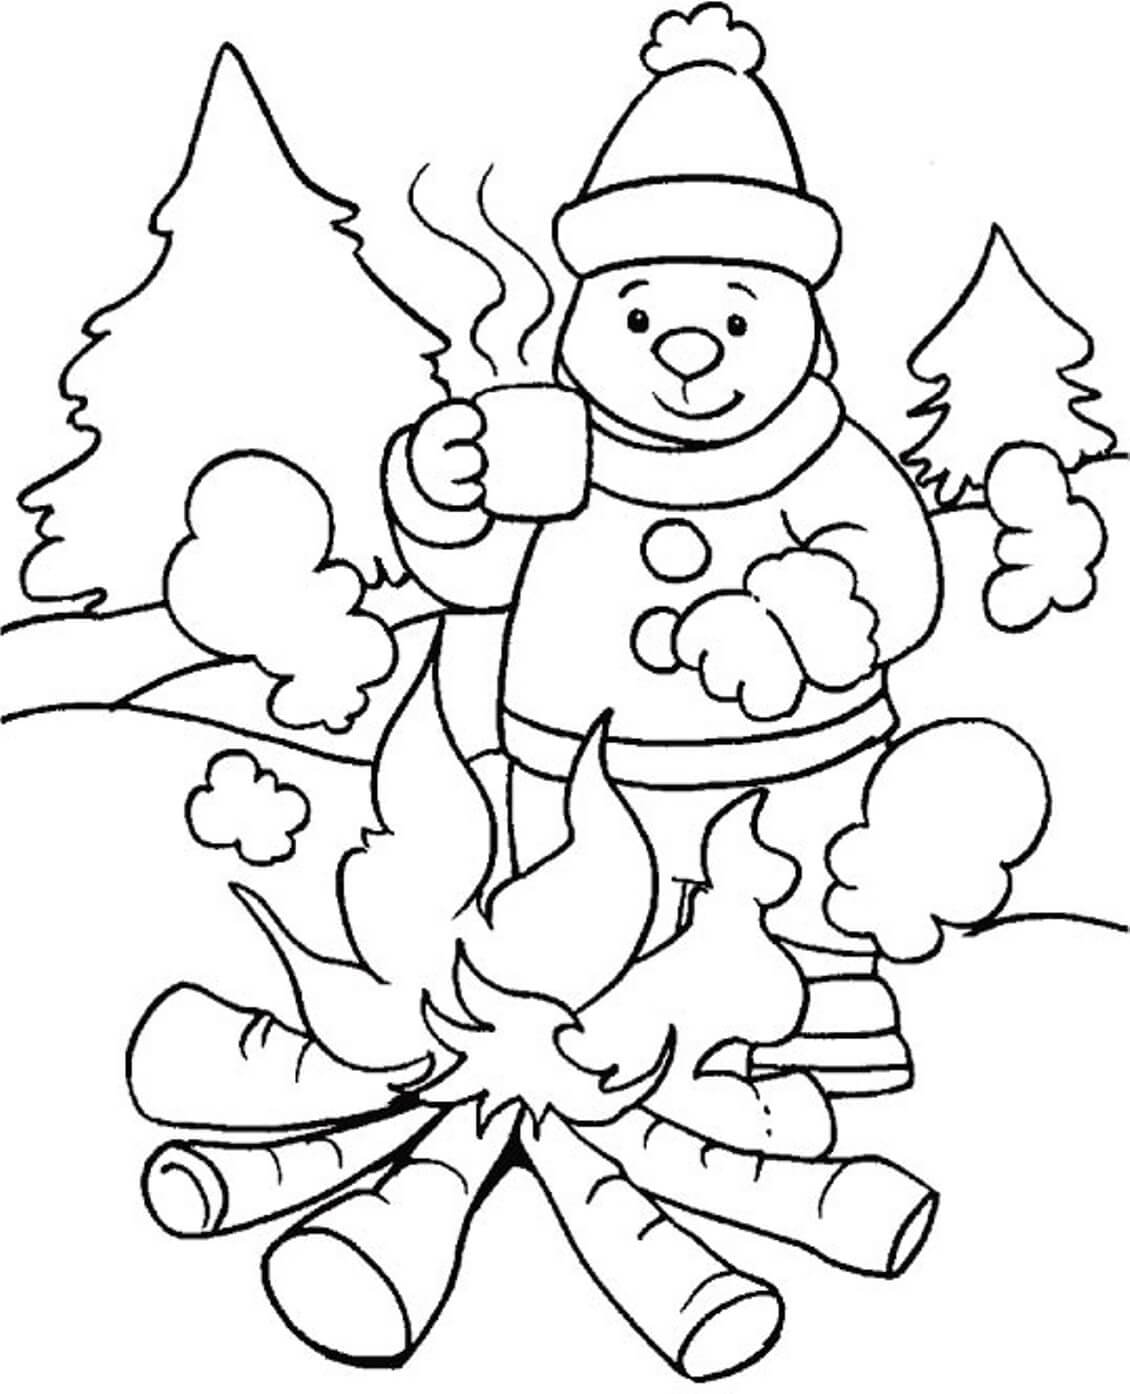 49 Winter Scene Coloring Pages For Adults PNG COLORIST